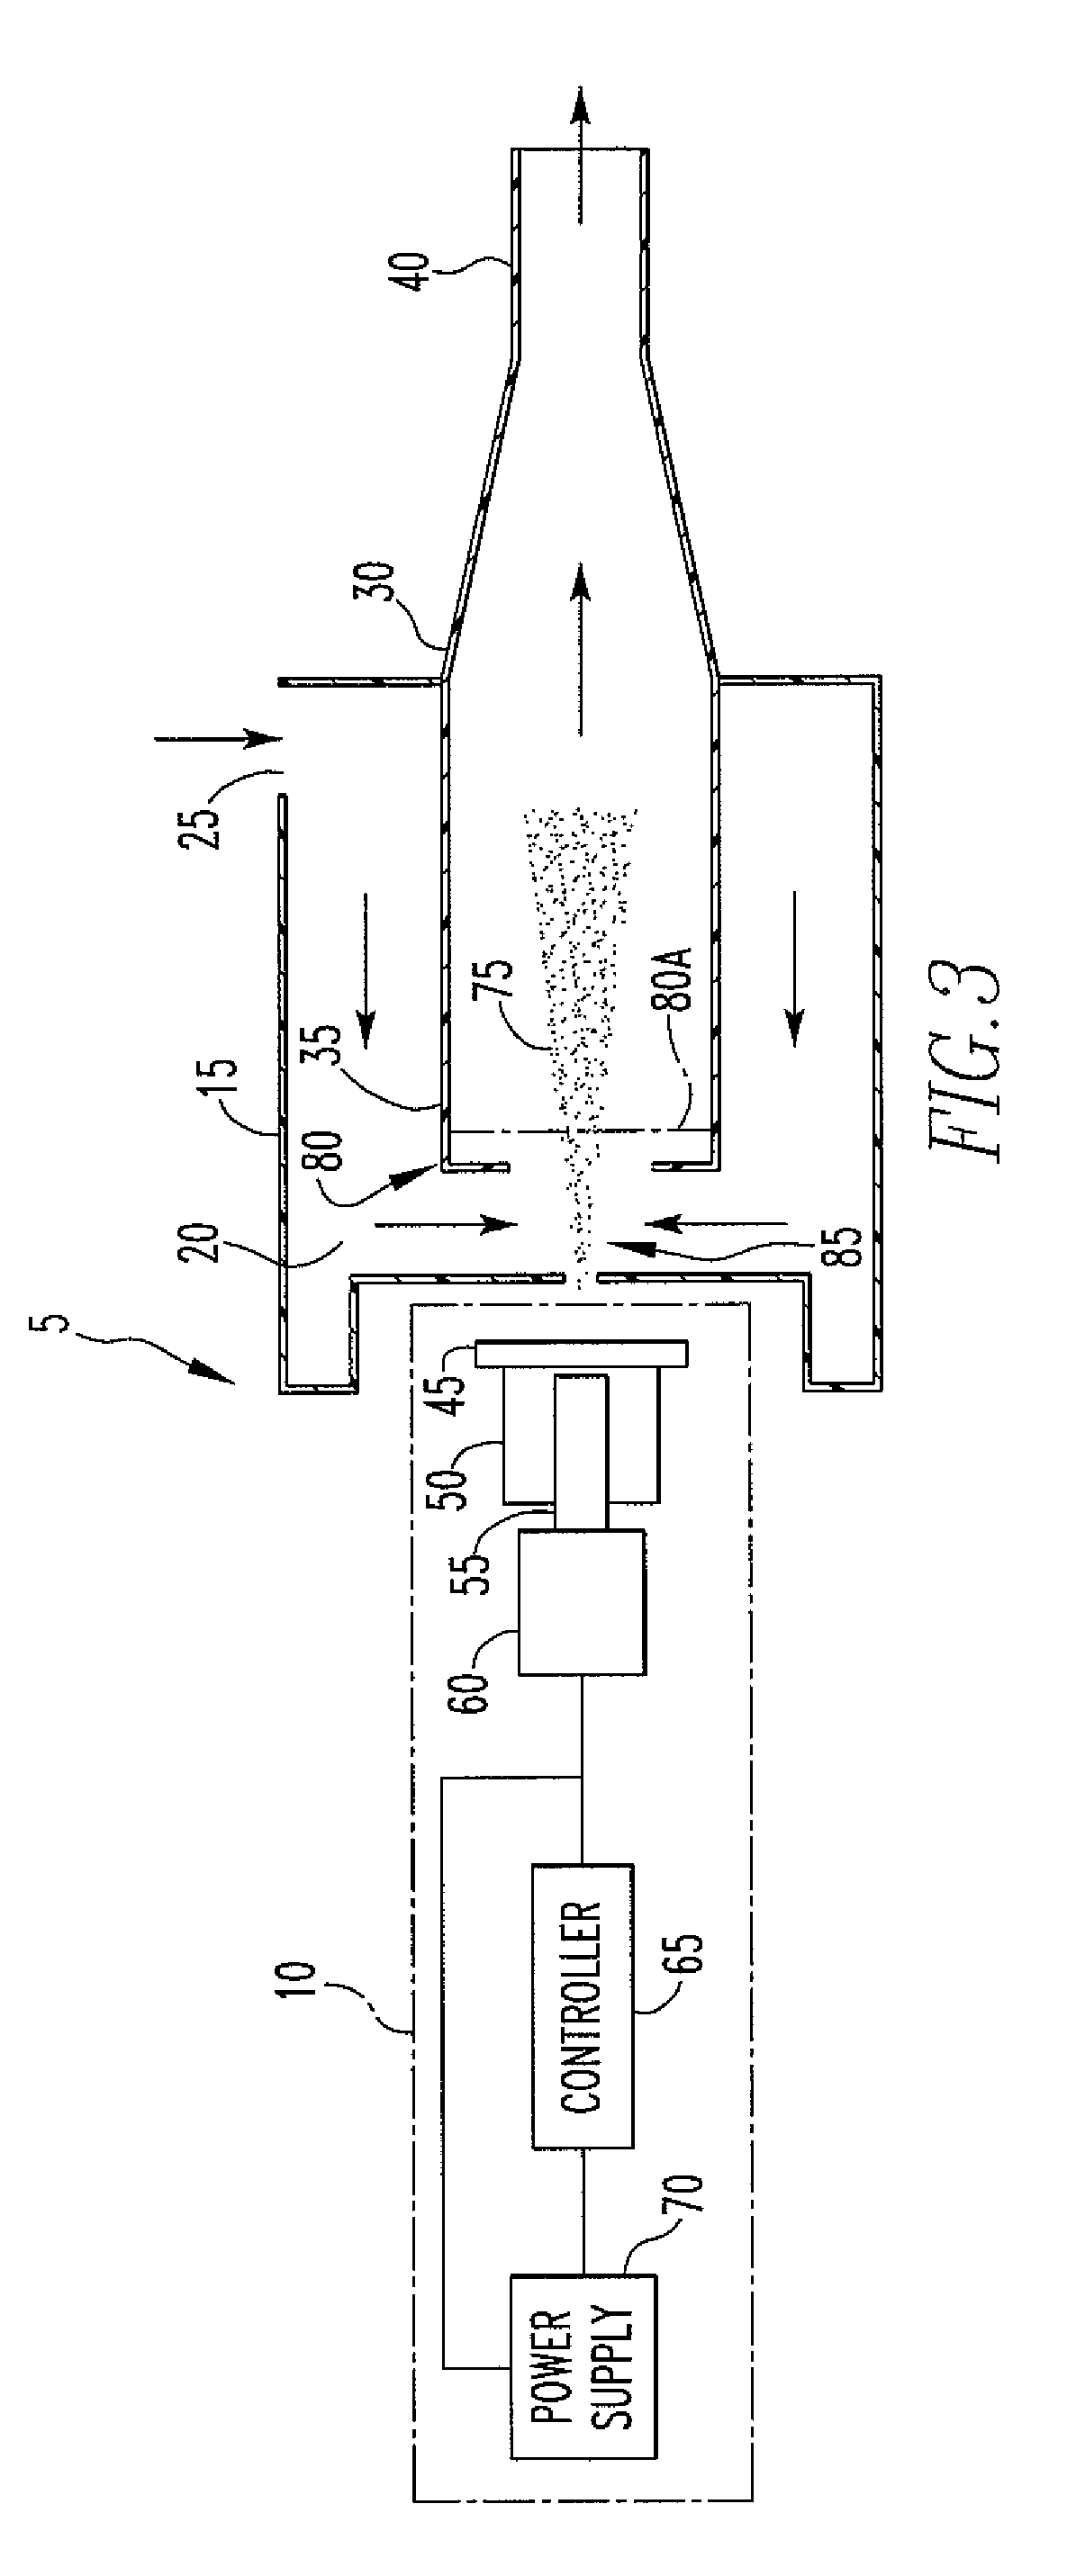 Drug Delivery Apparatus and Method